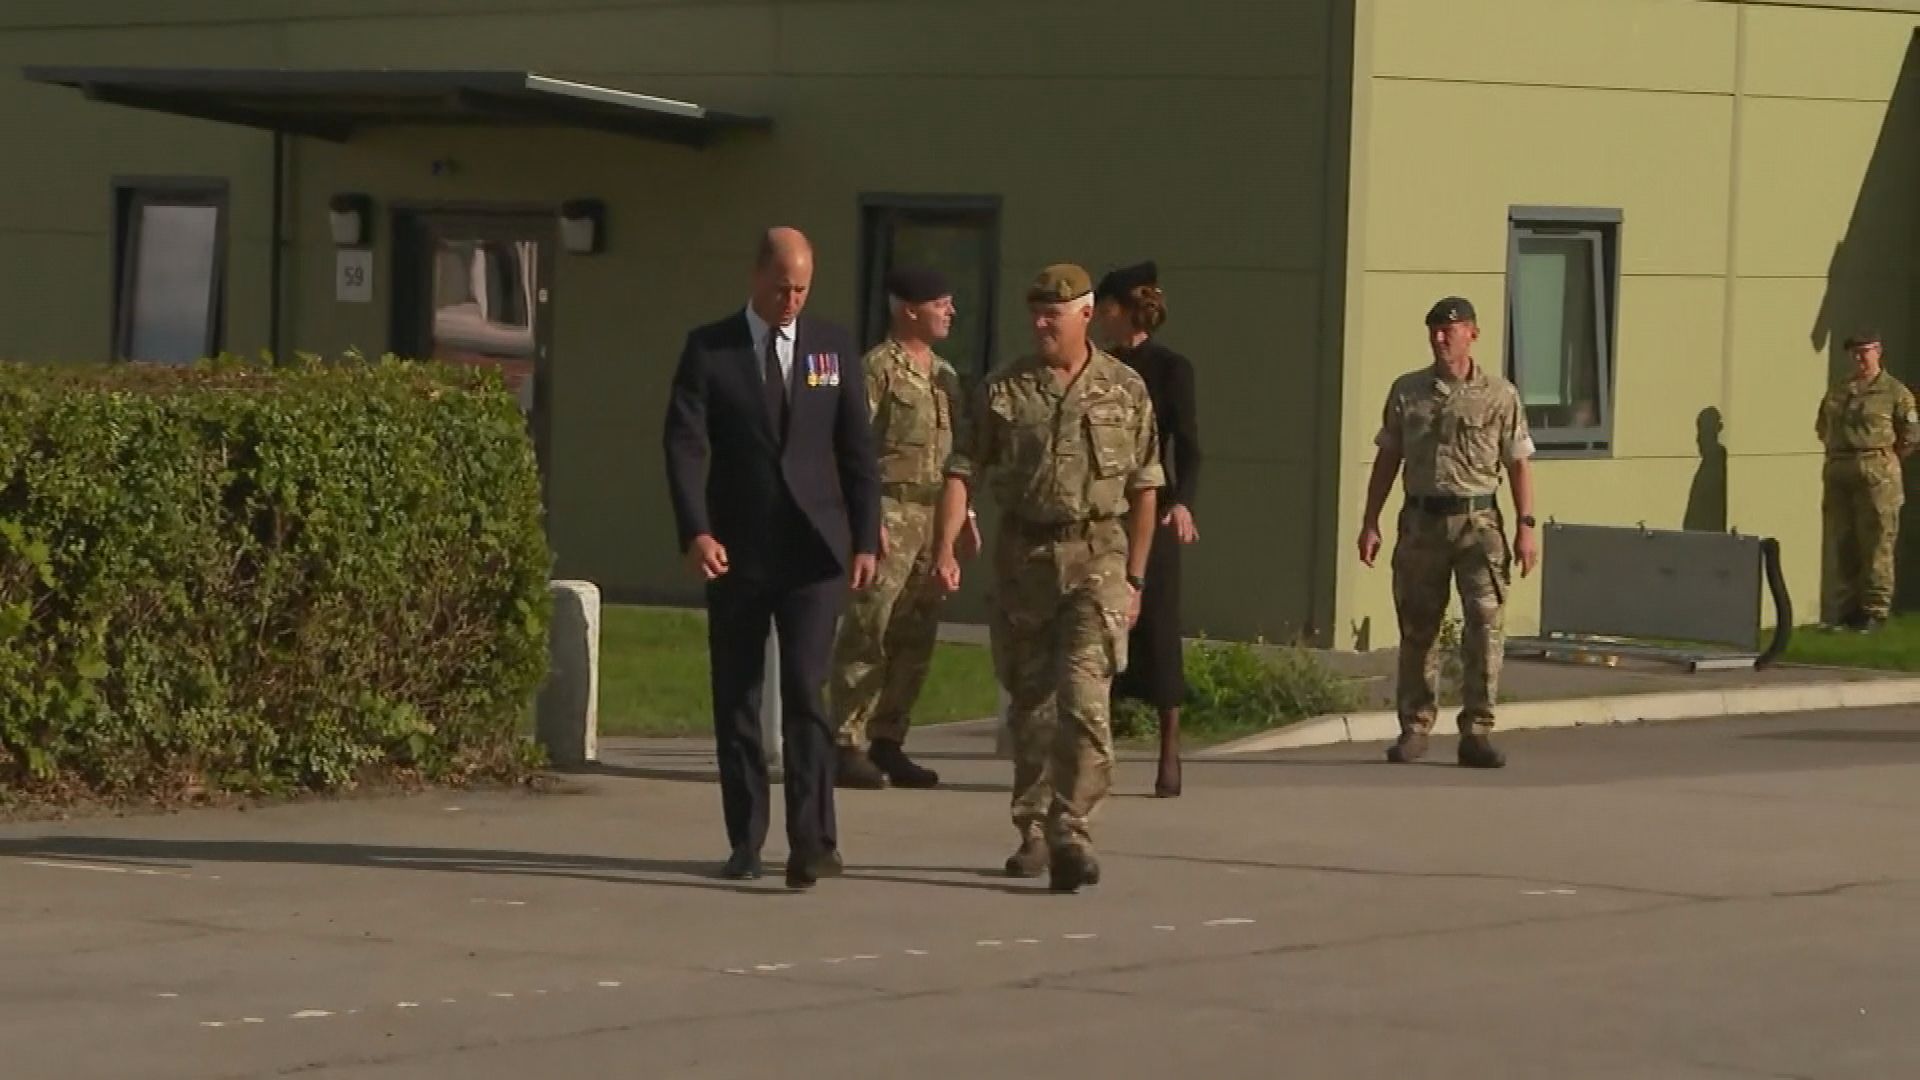 Prince William meeta with Australian troops who will be involved in the Queen's state funeral.